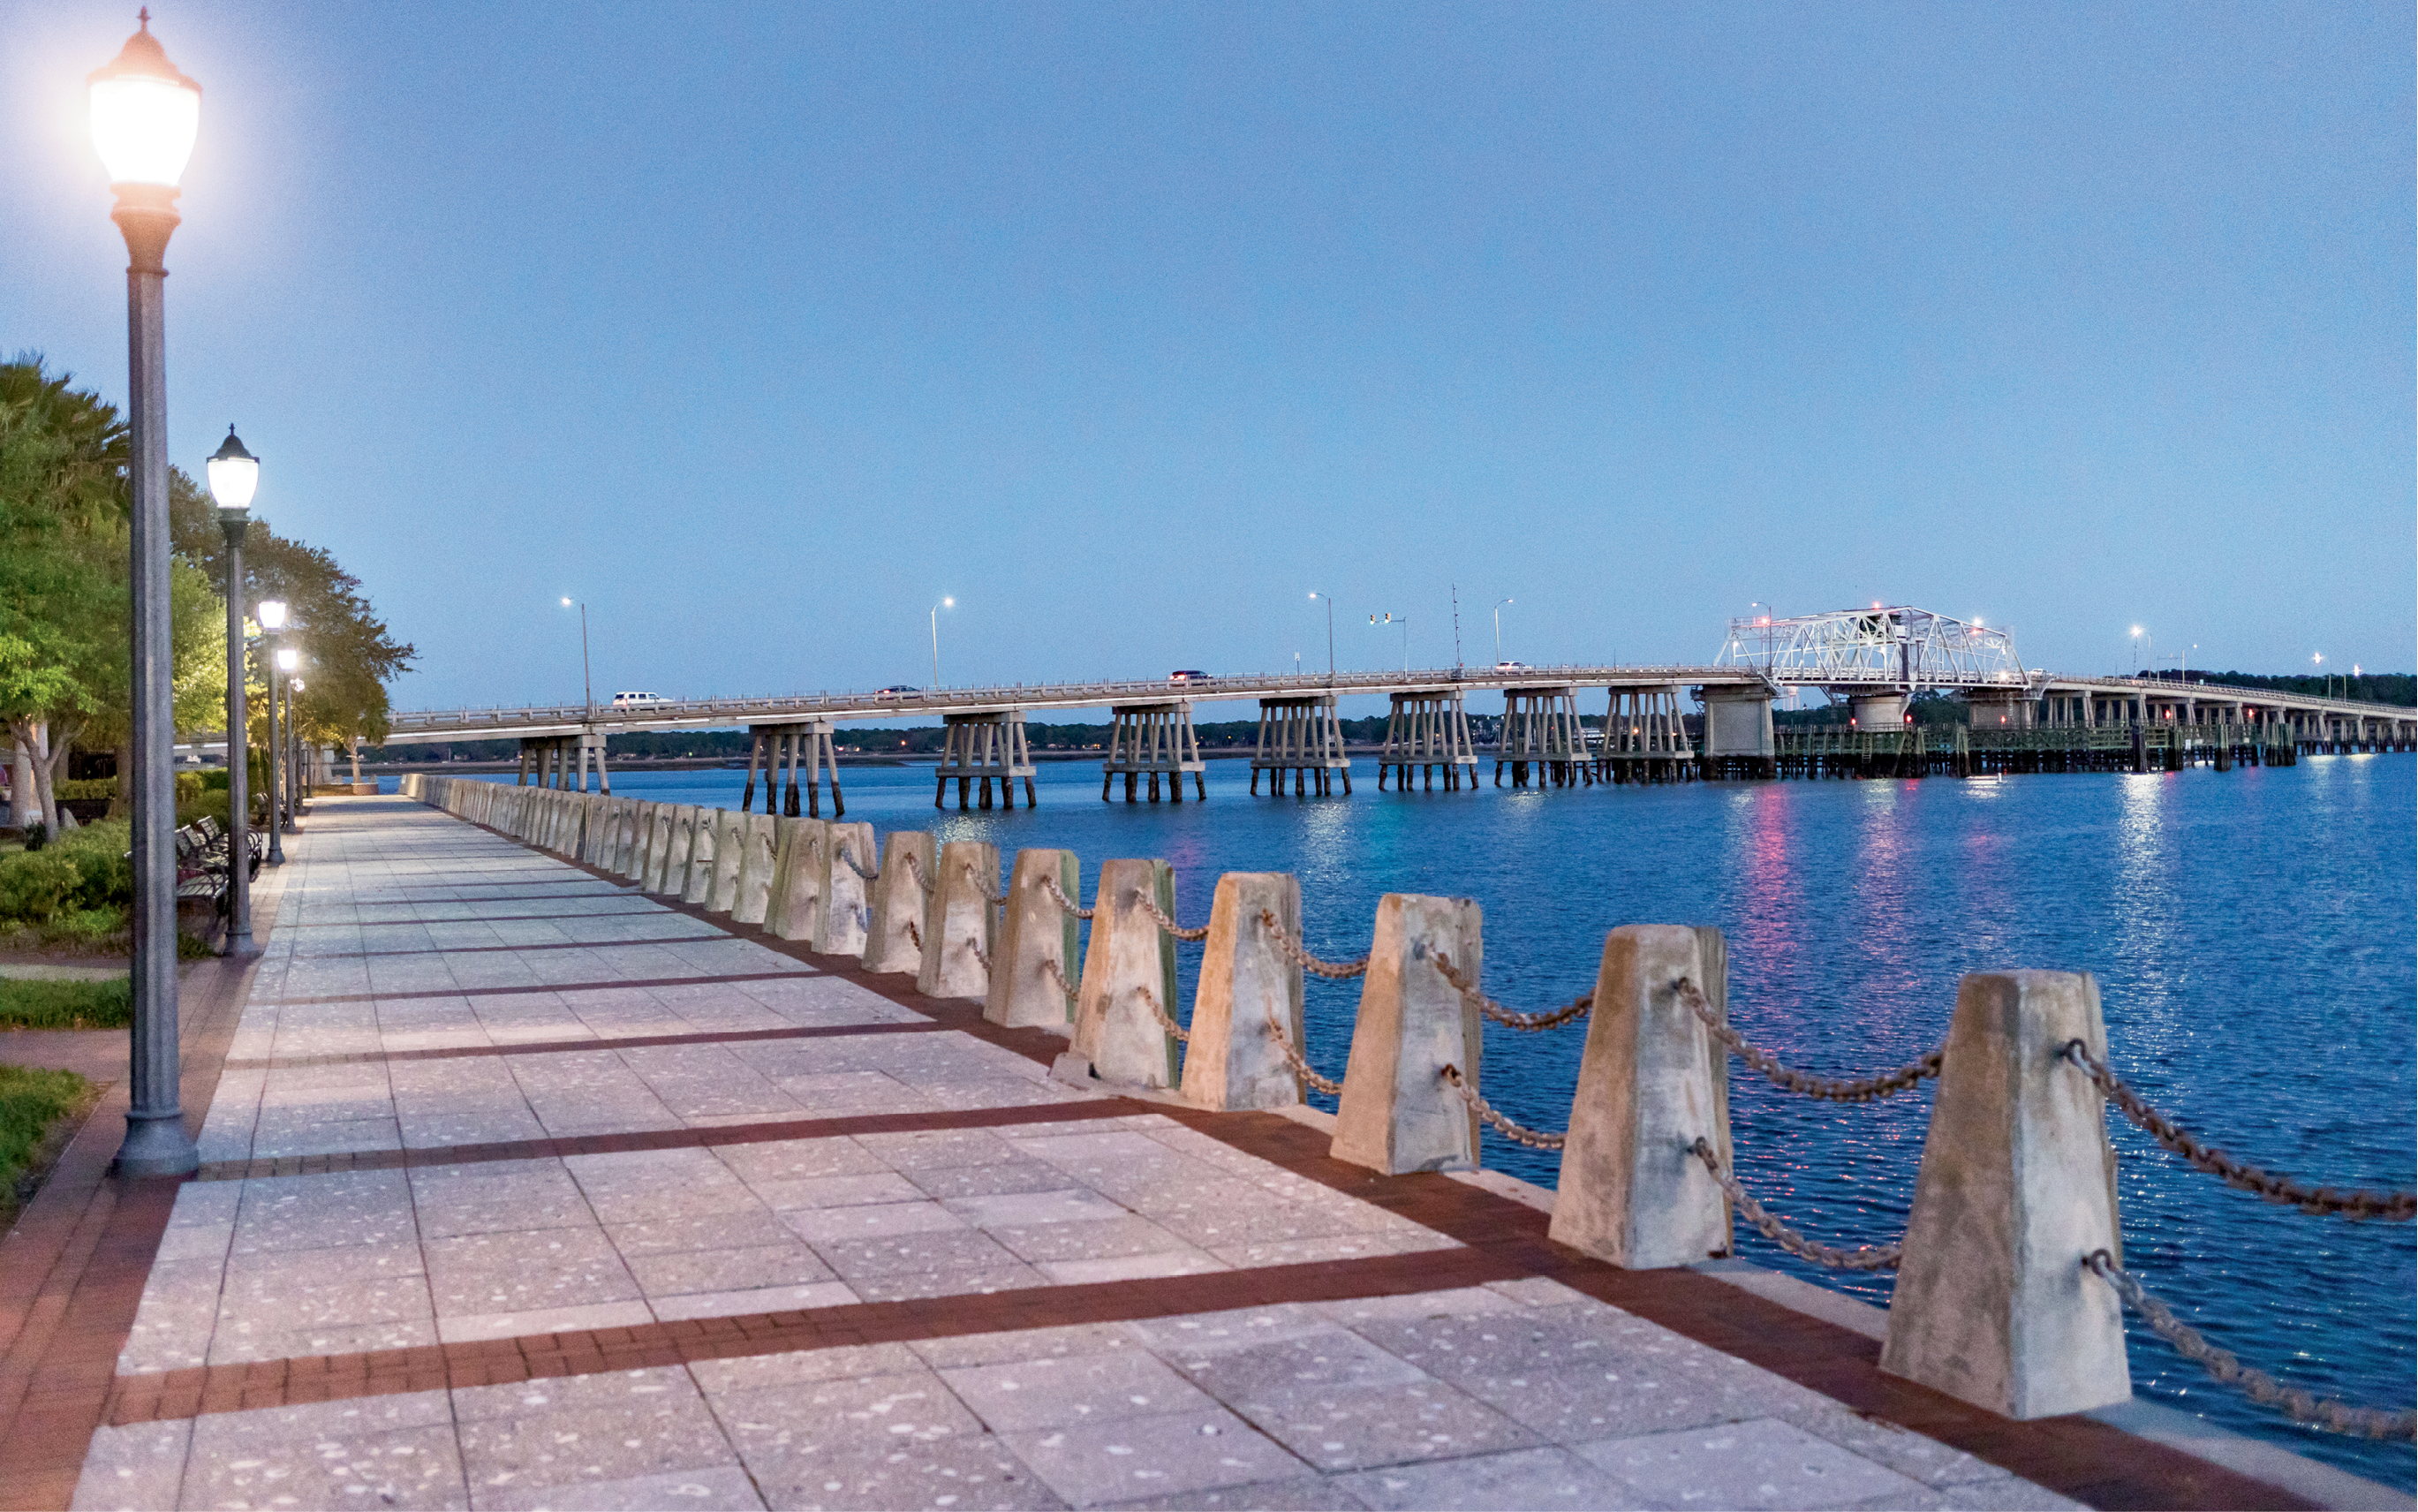 Public Spaces, Protected Views: The promenade at the Henry C. Chambers Waterfront Park, downtown on the Beaufort River